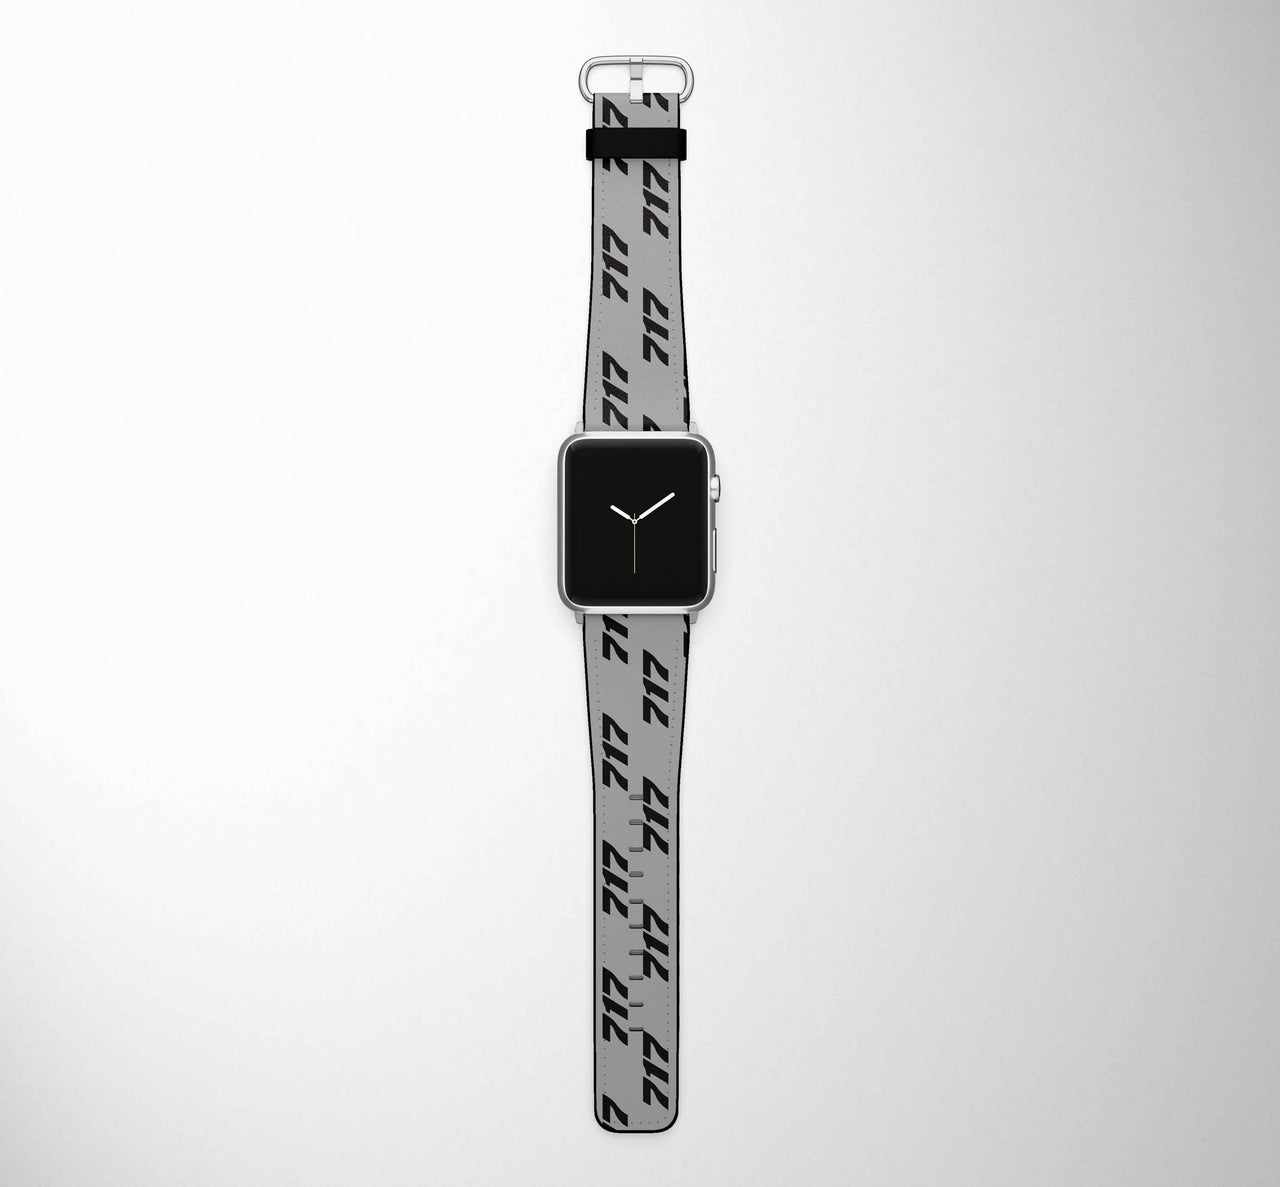 717 Flat Text Designed Leather Apple Watch Straps